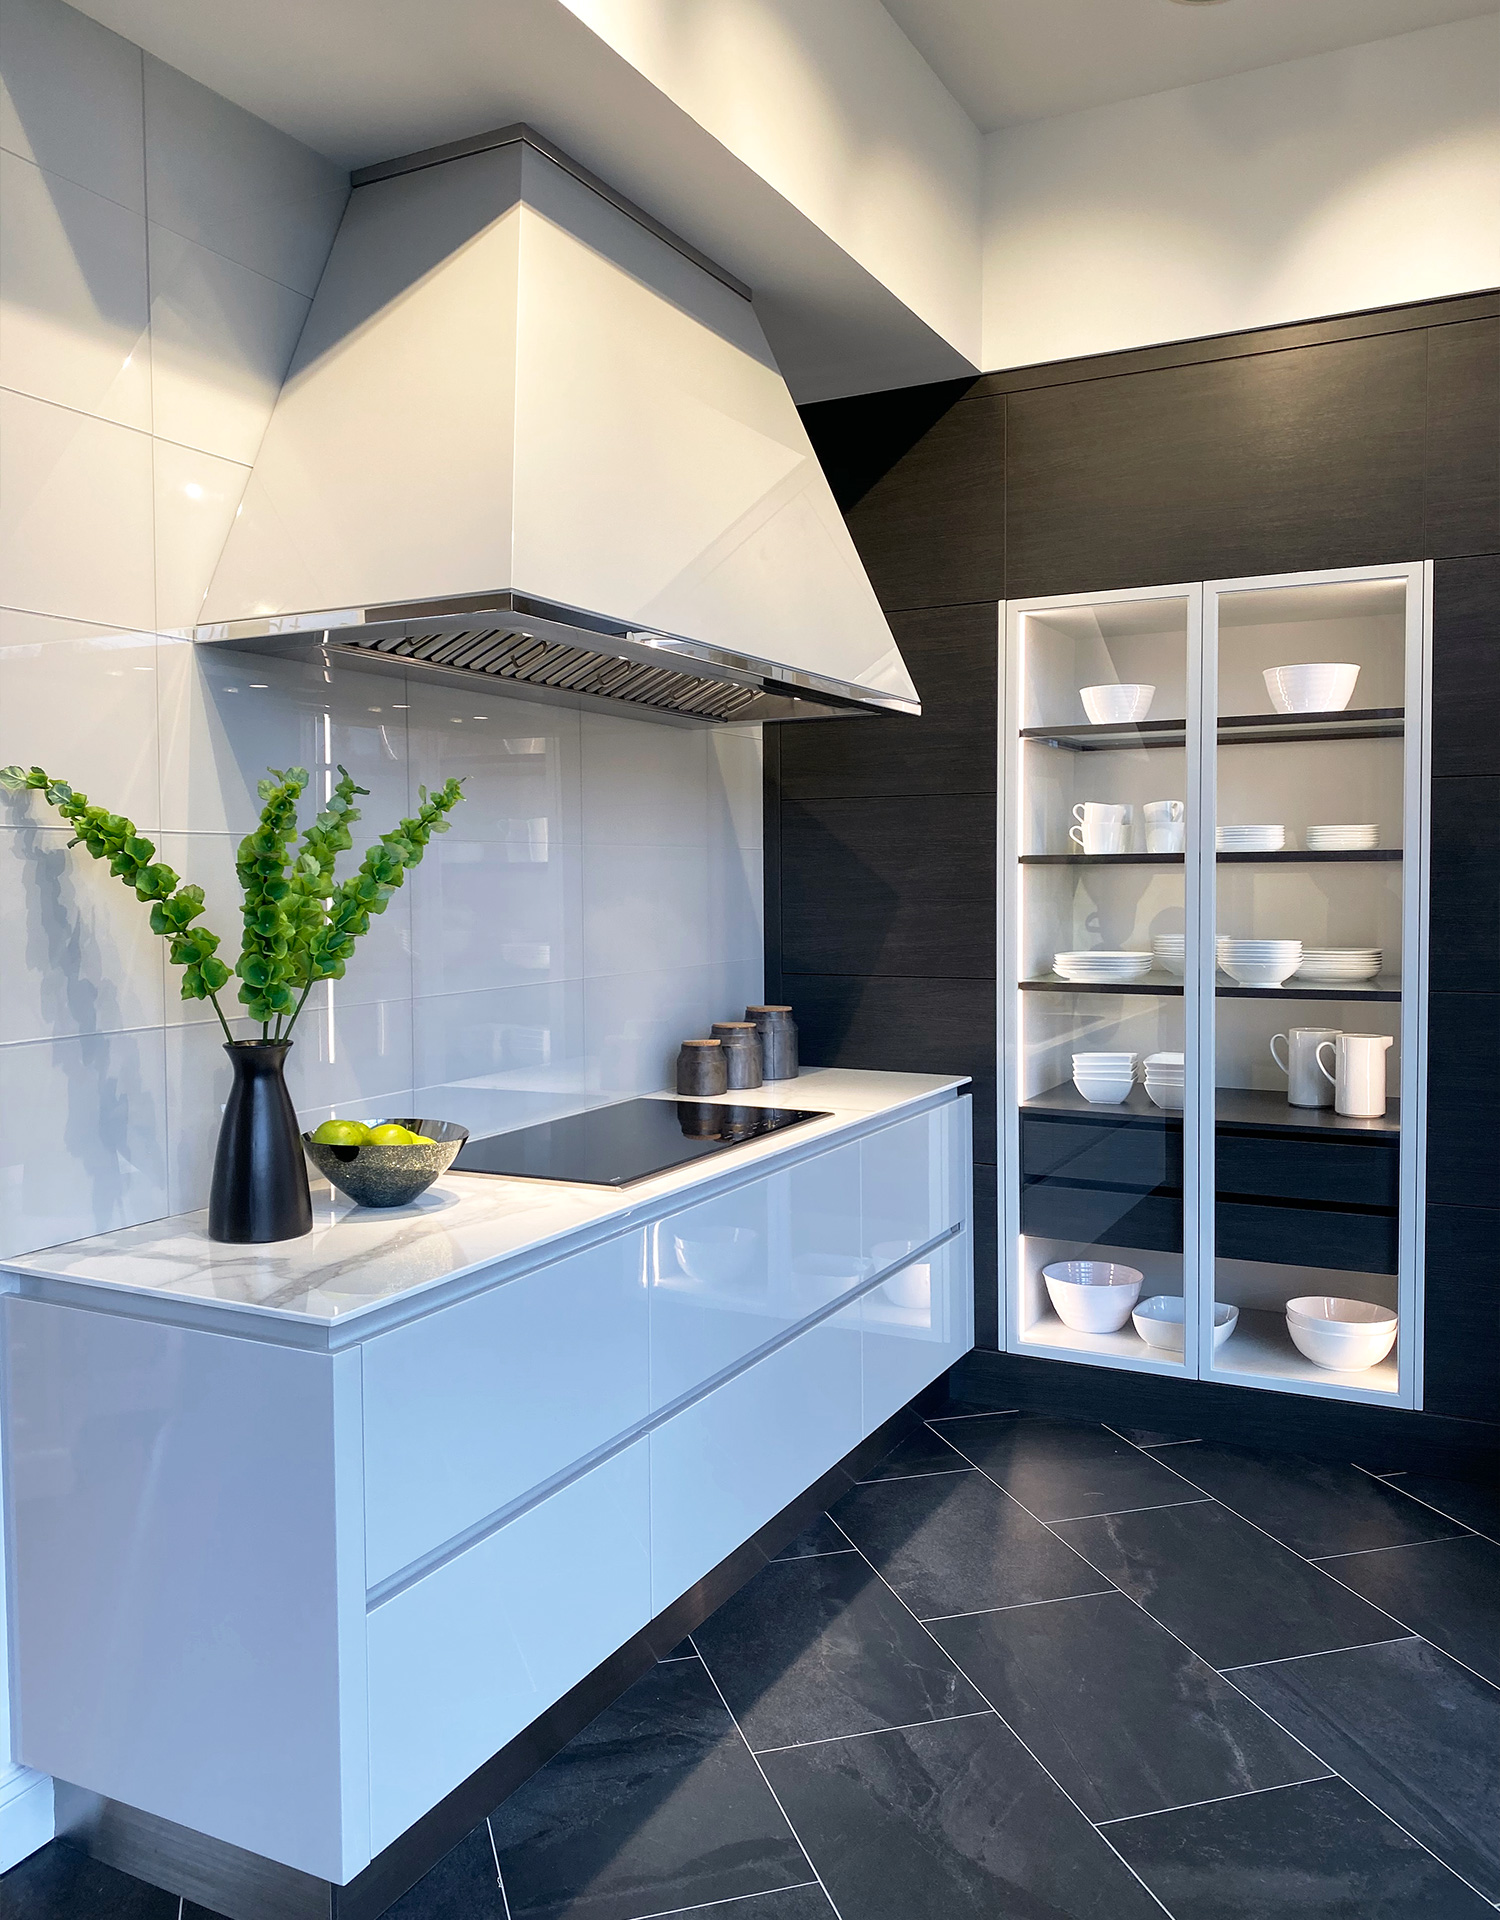 There is no one DEANE “look,” their variety of design styles, cabinetry finishes and decorative options is part of what sets them apart from other design firms.